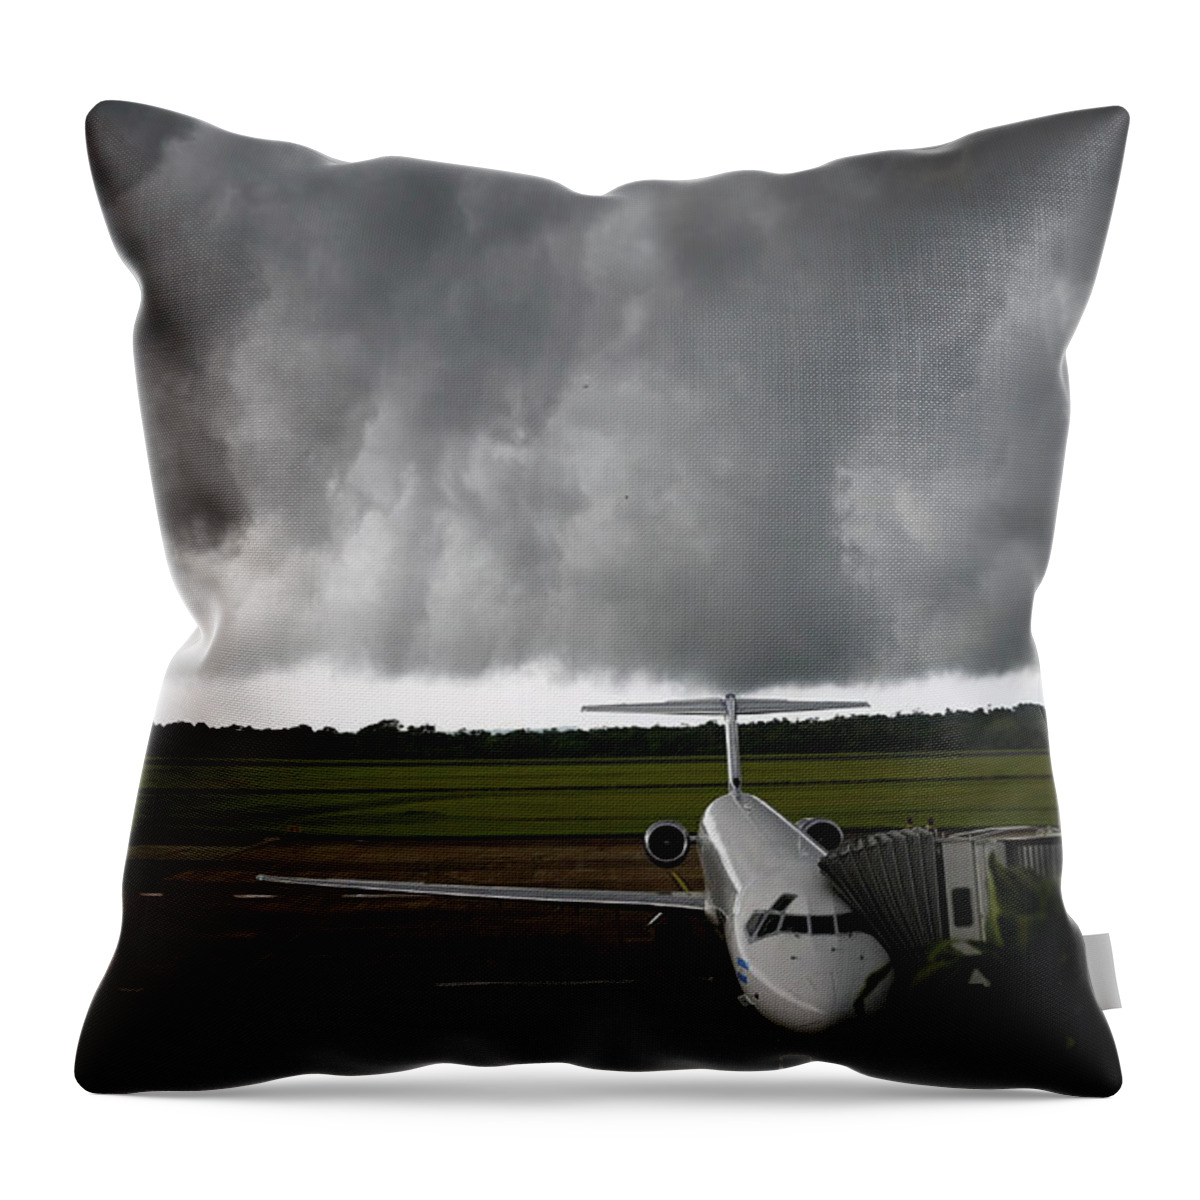 Airplane Throw Pillow featuring the photograph Airplane by 1001nights